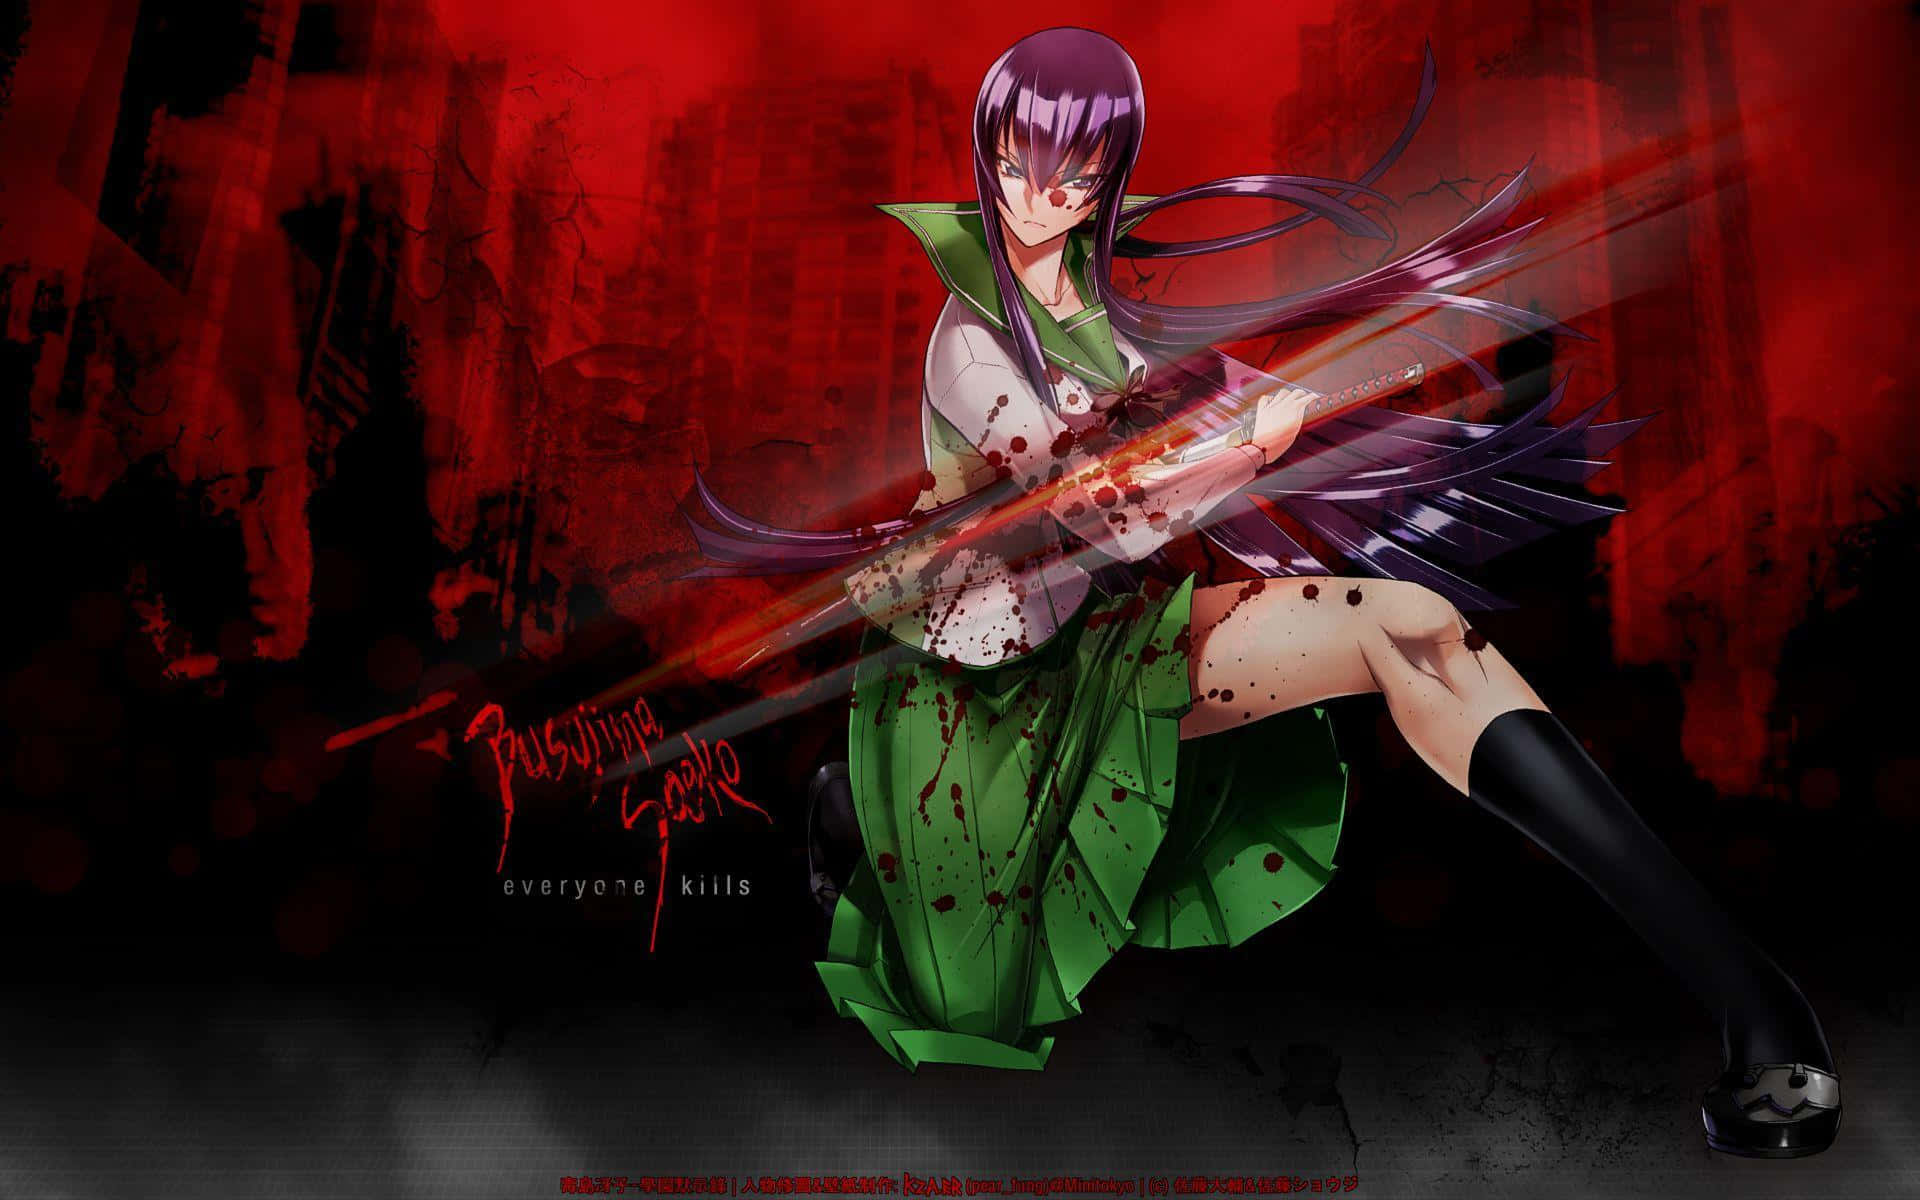 Surviving in a Post-Apocalyptic World: Highschool of the Dead